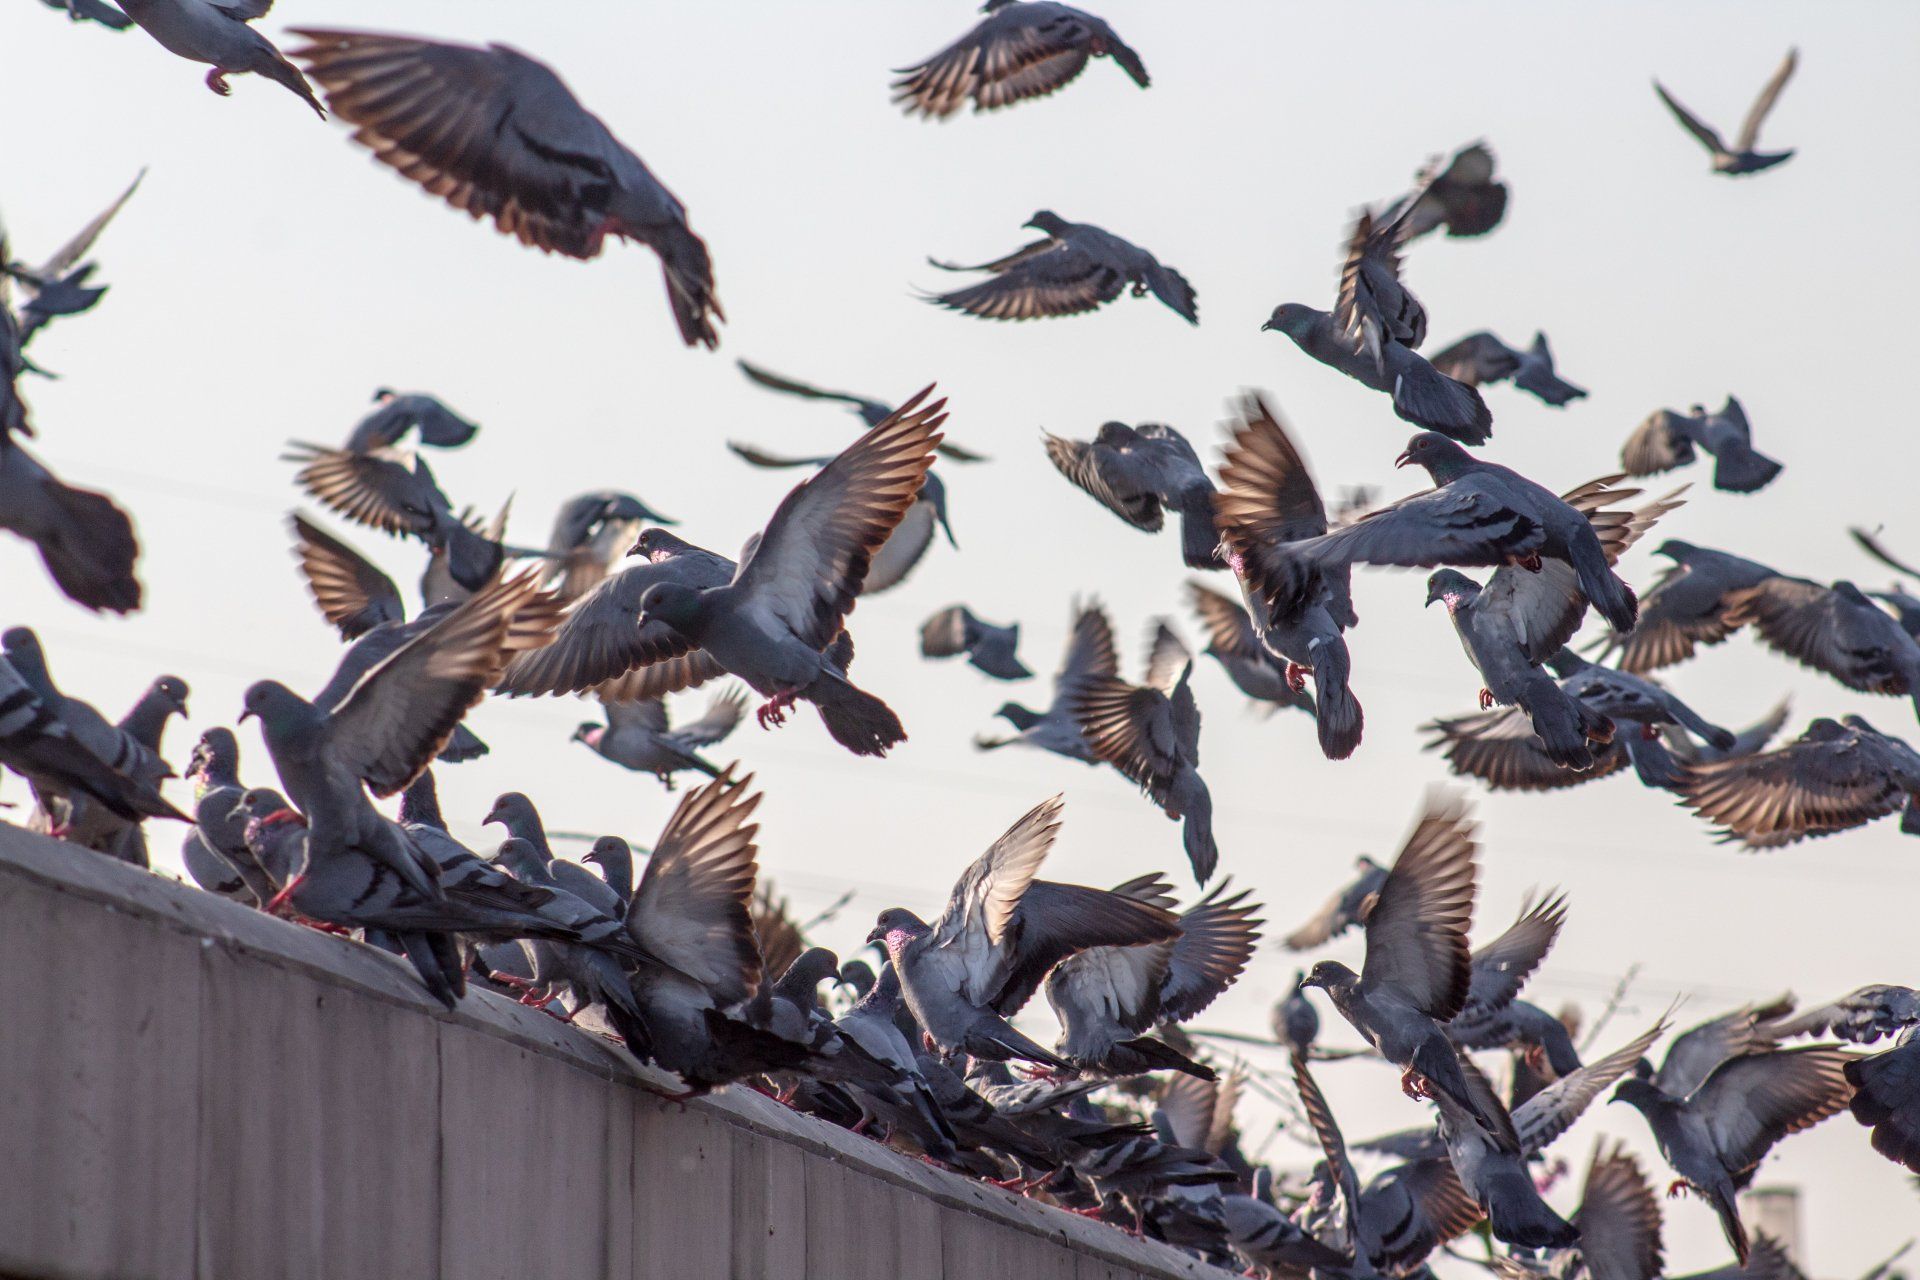 a flock of pigeons are flying over a building